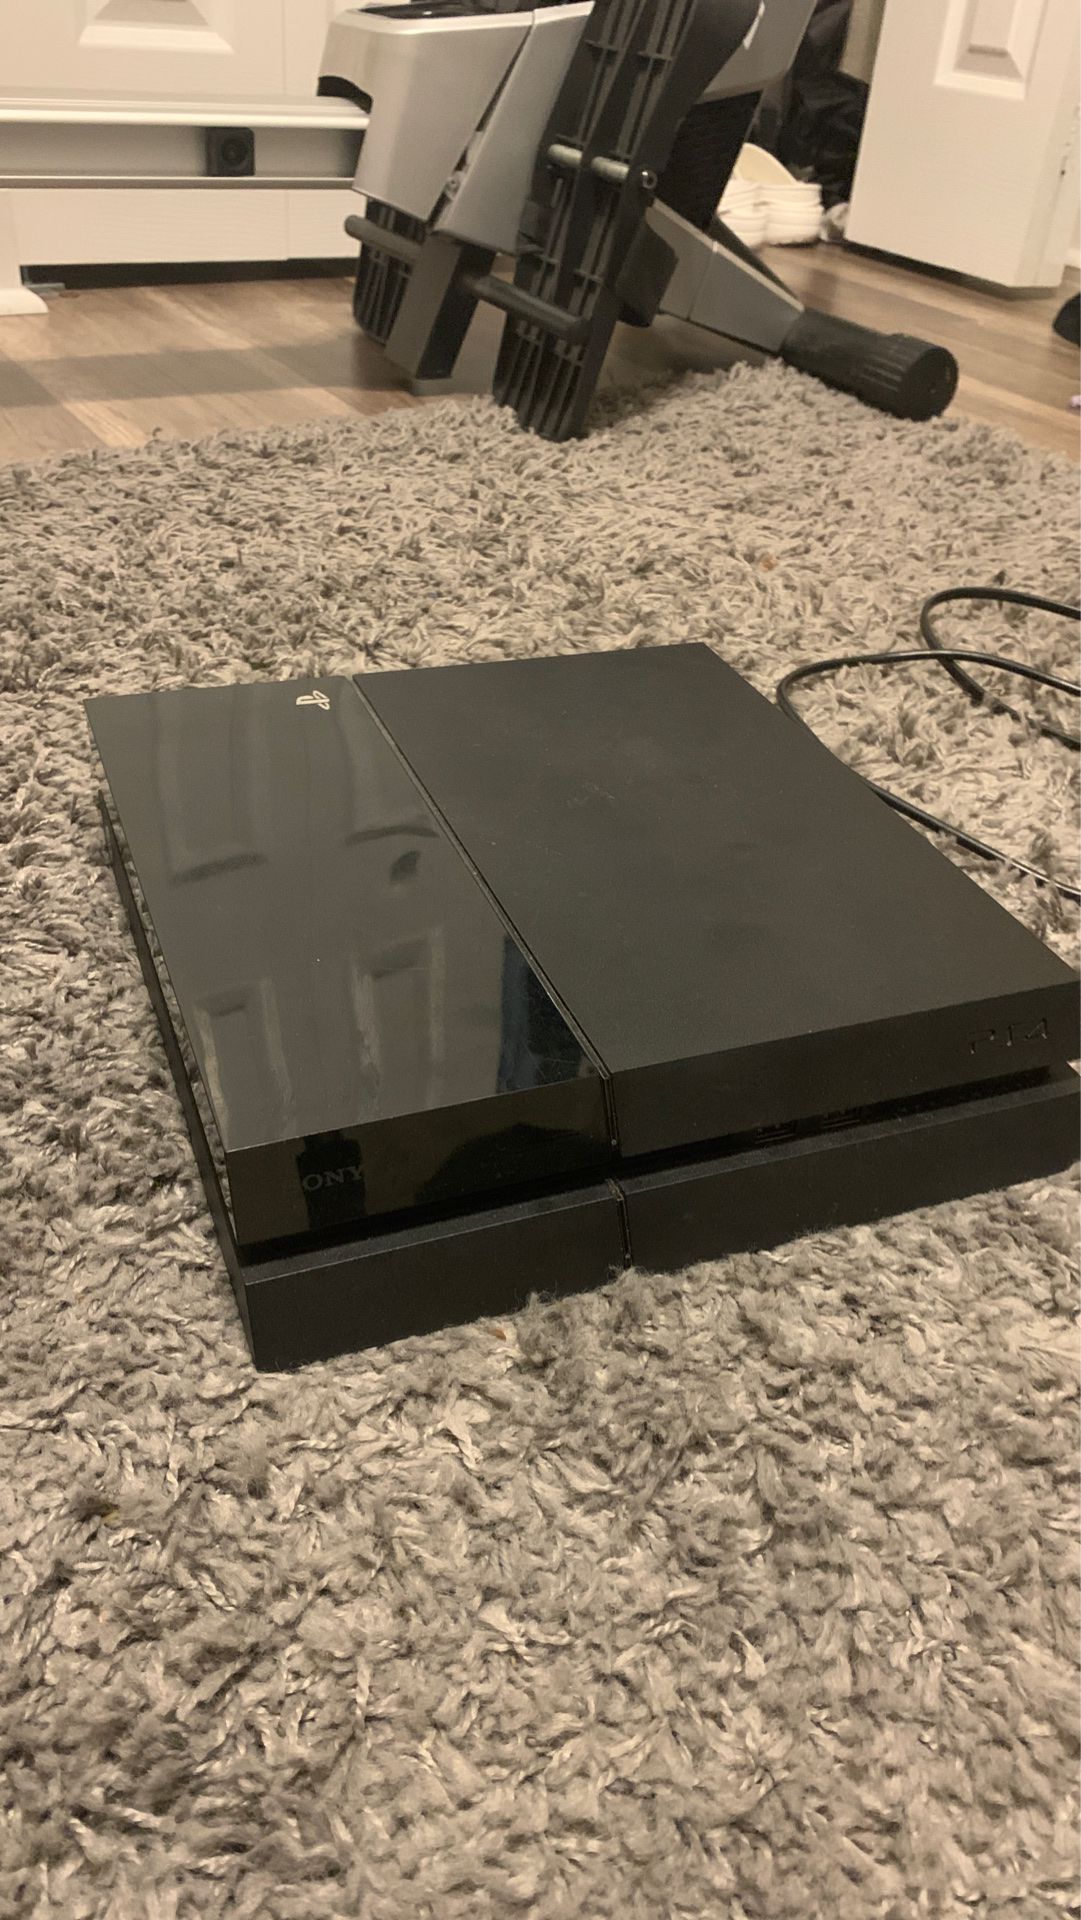 PS4 with controller, HDMI cable, power cable, Madden 20, Overwatch